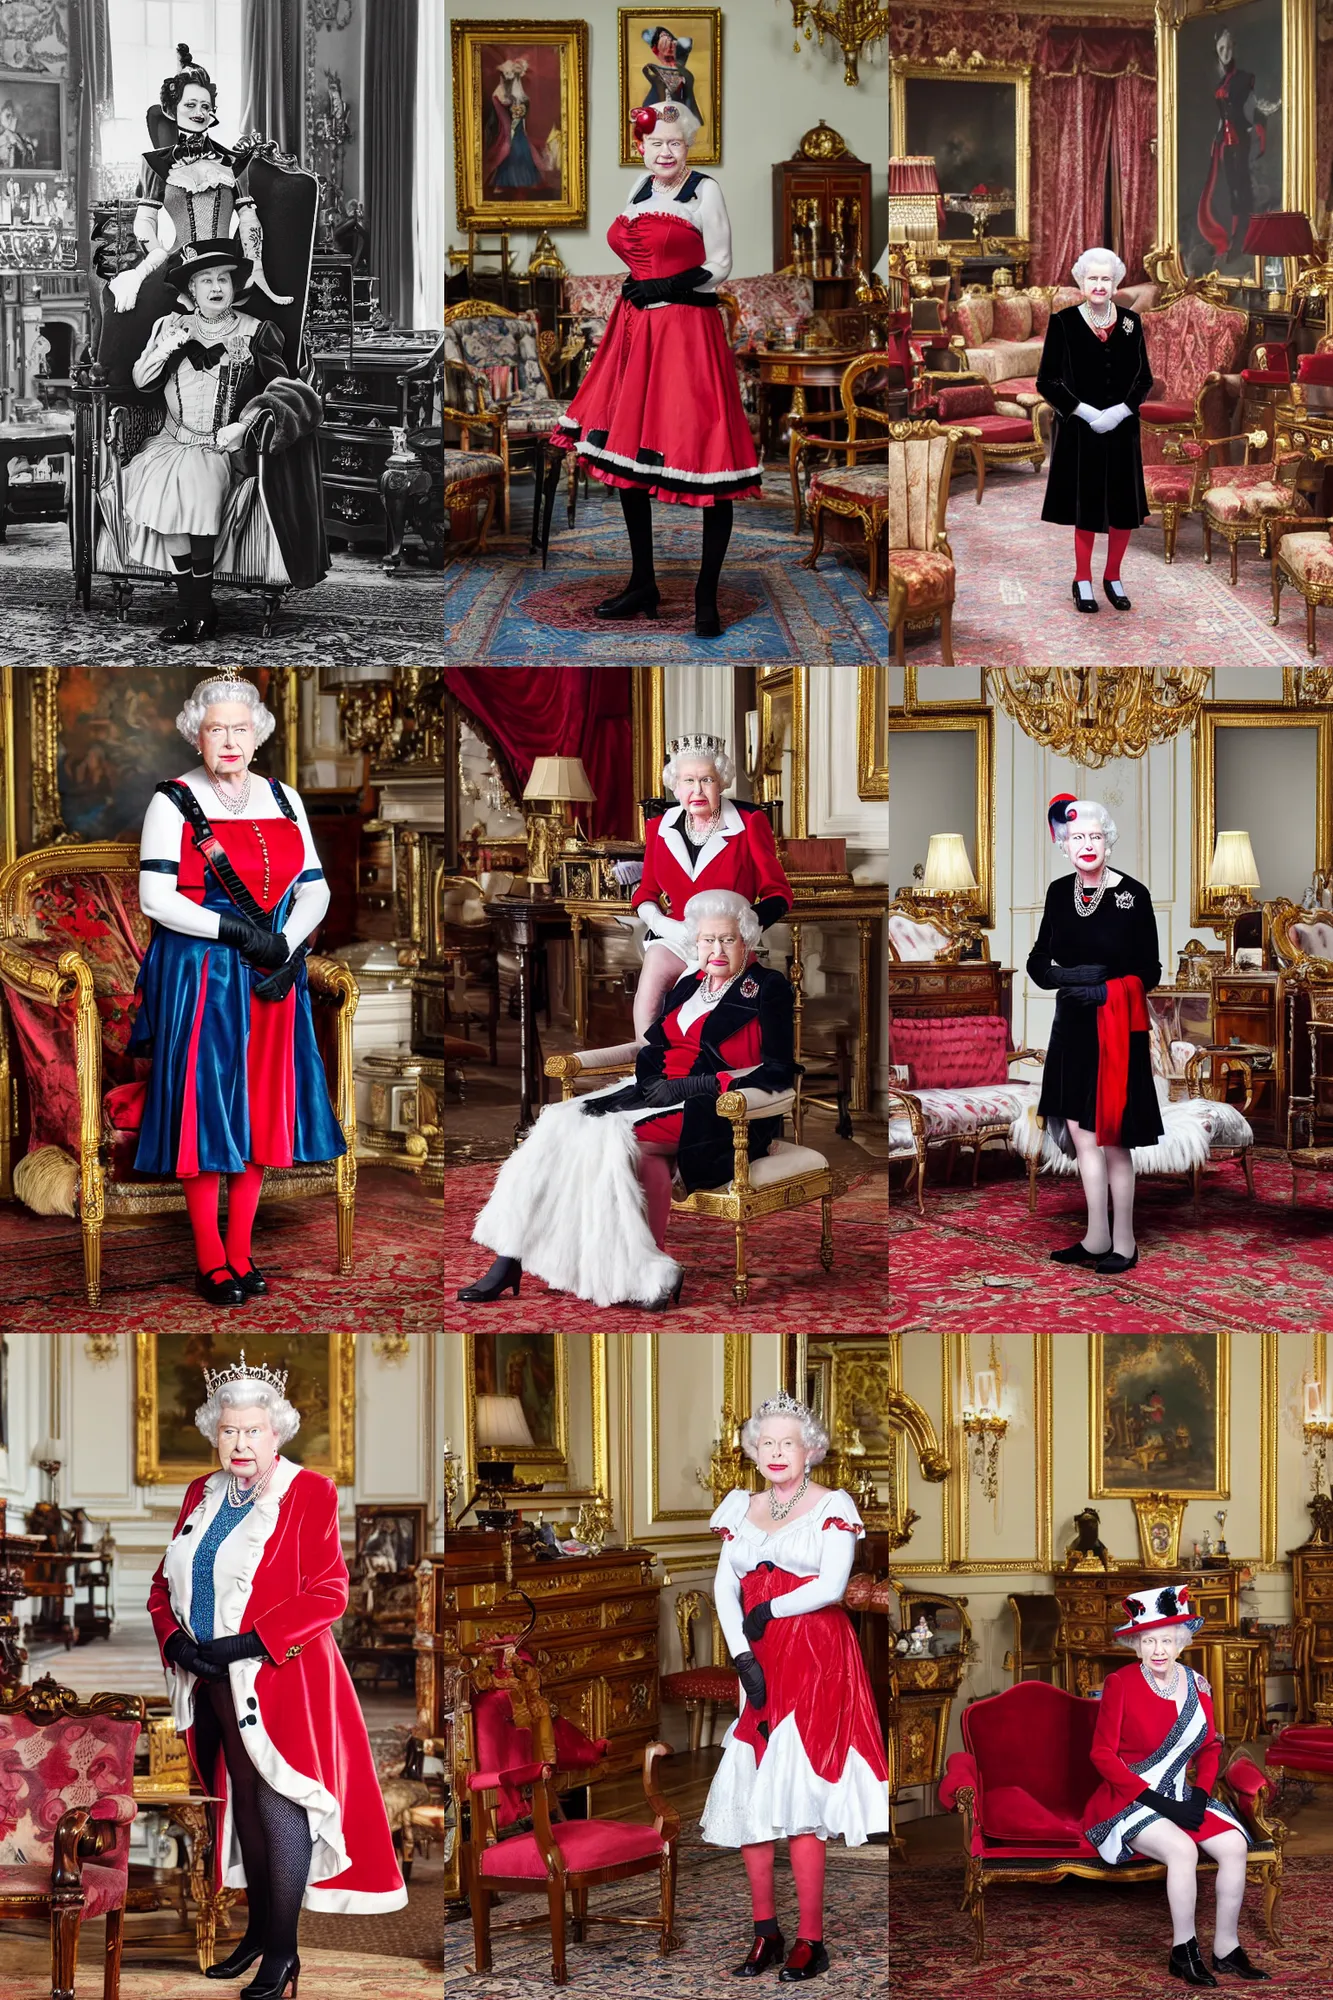 Prompt: Queen Elizabeth dressed as Harley Quinn, surrounded by Victorian furniture at Buckingham Palace, professional portrait photo, 100 mm lens